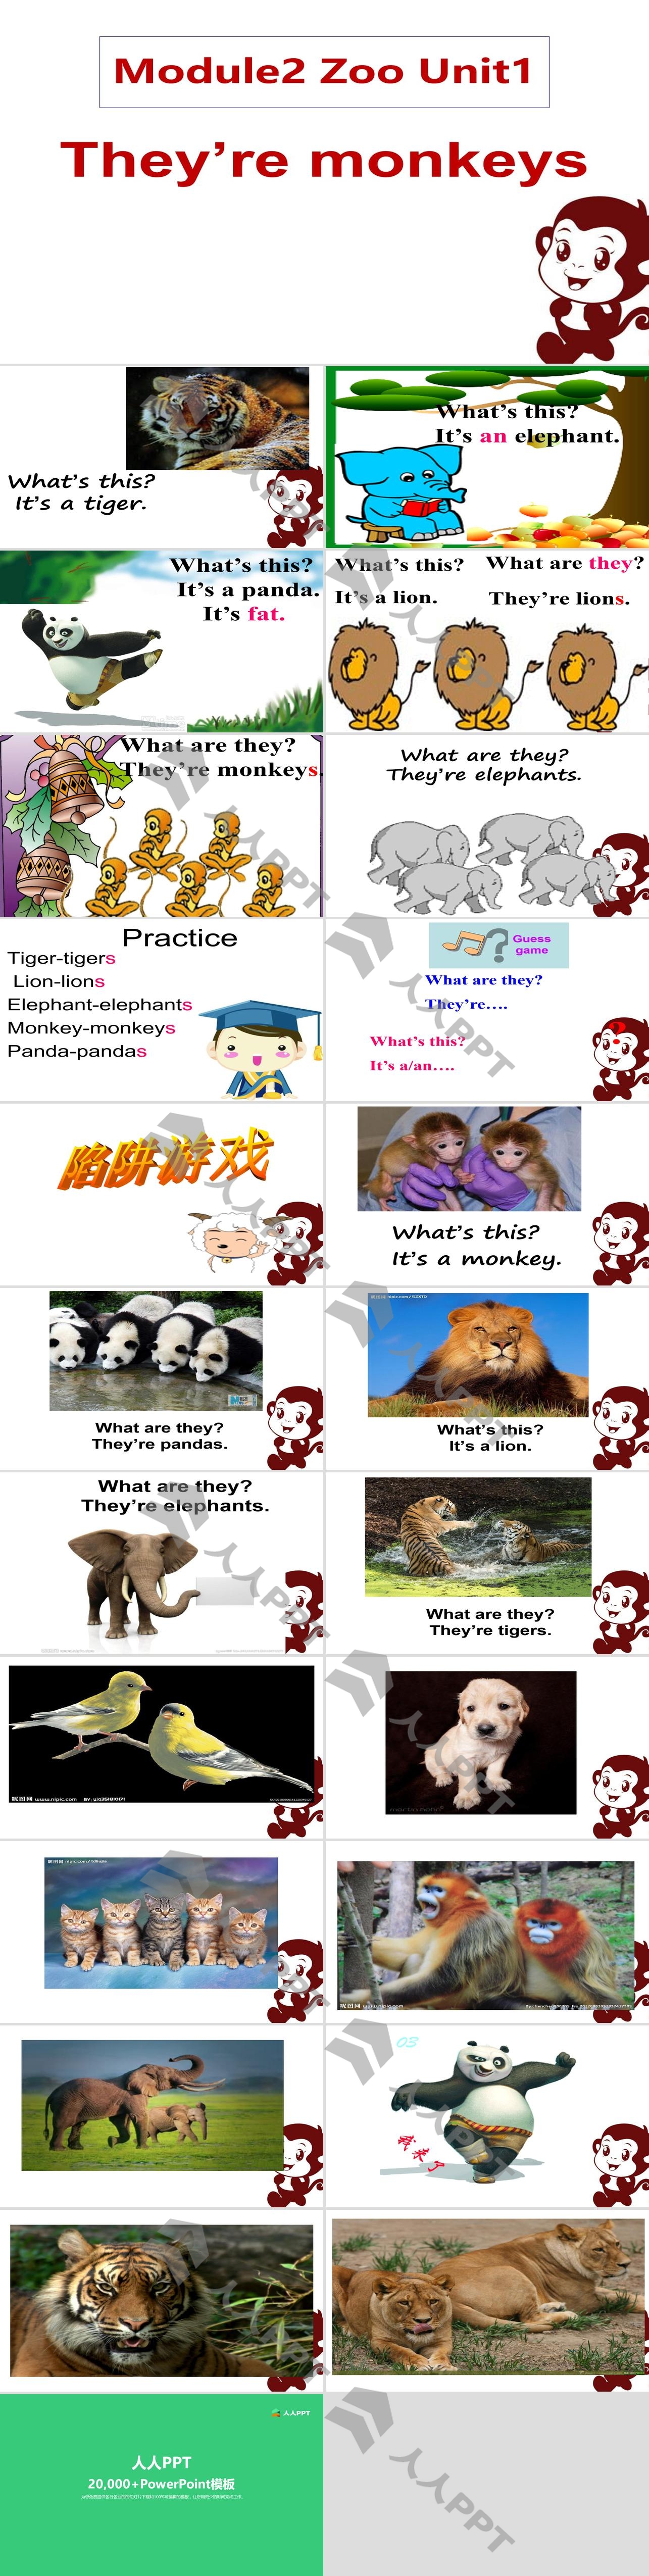 《They are monkeys》PPT课件2长图